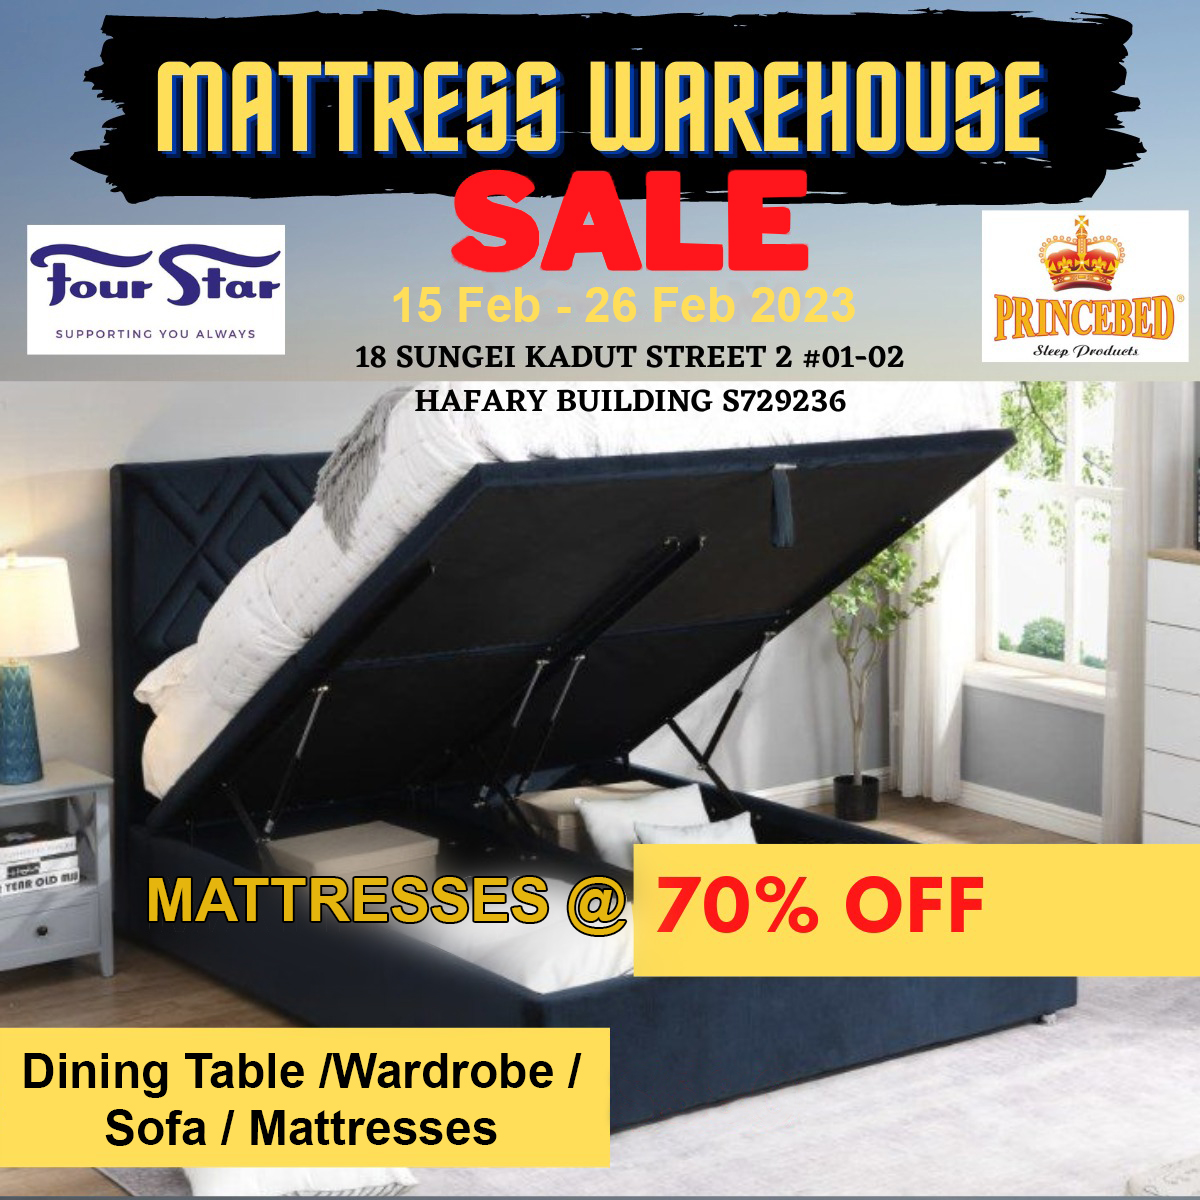 Lobang: Furniture warehouse sale at Sungei Kadut has up to 70% off mattresses, dining tables, wardrobes, sofas and more from 15 - 26 Feb 23 - 5